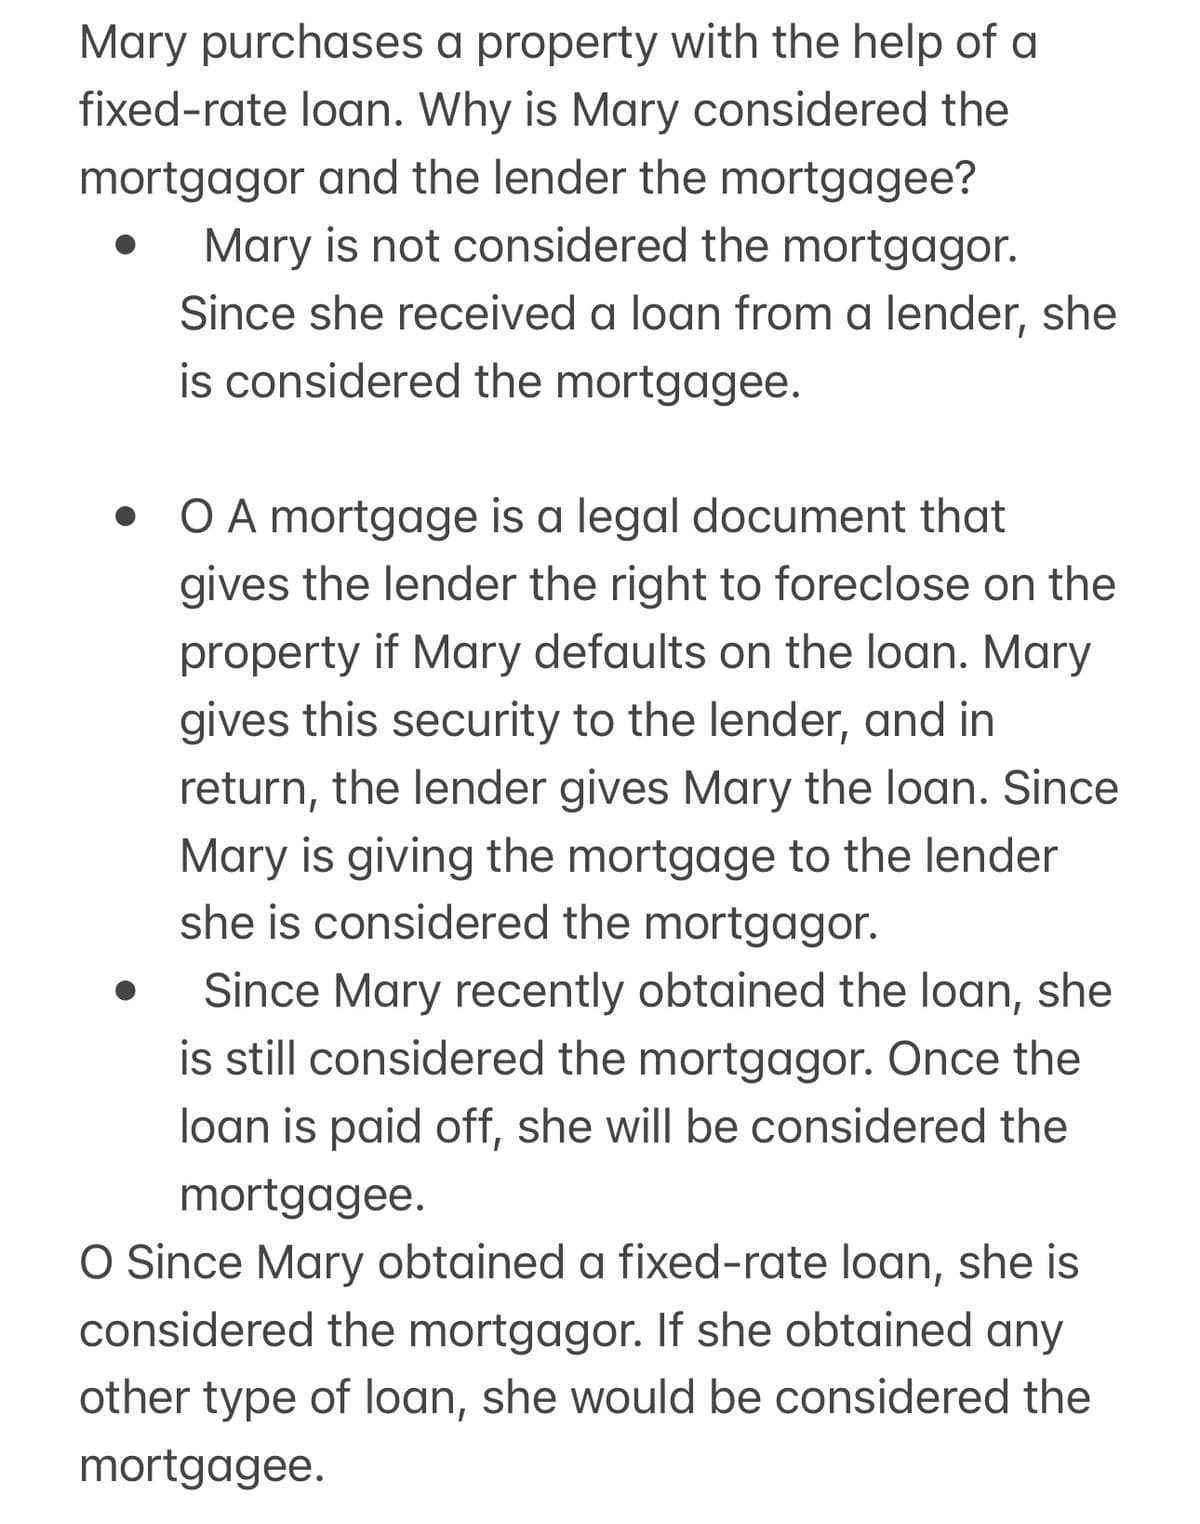 Mary purchases a property with the help of a
fixed-rate loan. Why is Mary considered the
mortgagor and the lender the mortgagee?
Mary is not considered the mortgagor.
Since she received a loan from a lender, she
is considered the mortgagee.
• O A mortgage is a legal document that
gives the lender the right to foreclose on the
property if Mary defaults on the loan. Mary
gives this security to the lender, and in
return, the lender gives Mary the loan. Since
Mary is giving the mortgage to the lender
she is considered the mortgagor.
Since Mary recently obtained the loan, she
is still considered the mortgagor. Once the
loan is paid off, she will be considered the
mortgagee.
O Since Mary obtained a fixed-rate loan, she is
considered the mortgagor. If she obtained any
other type of loan, she would be considered the
mortgagee.